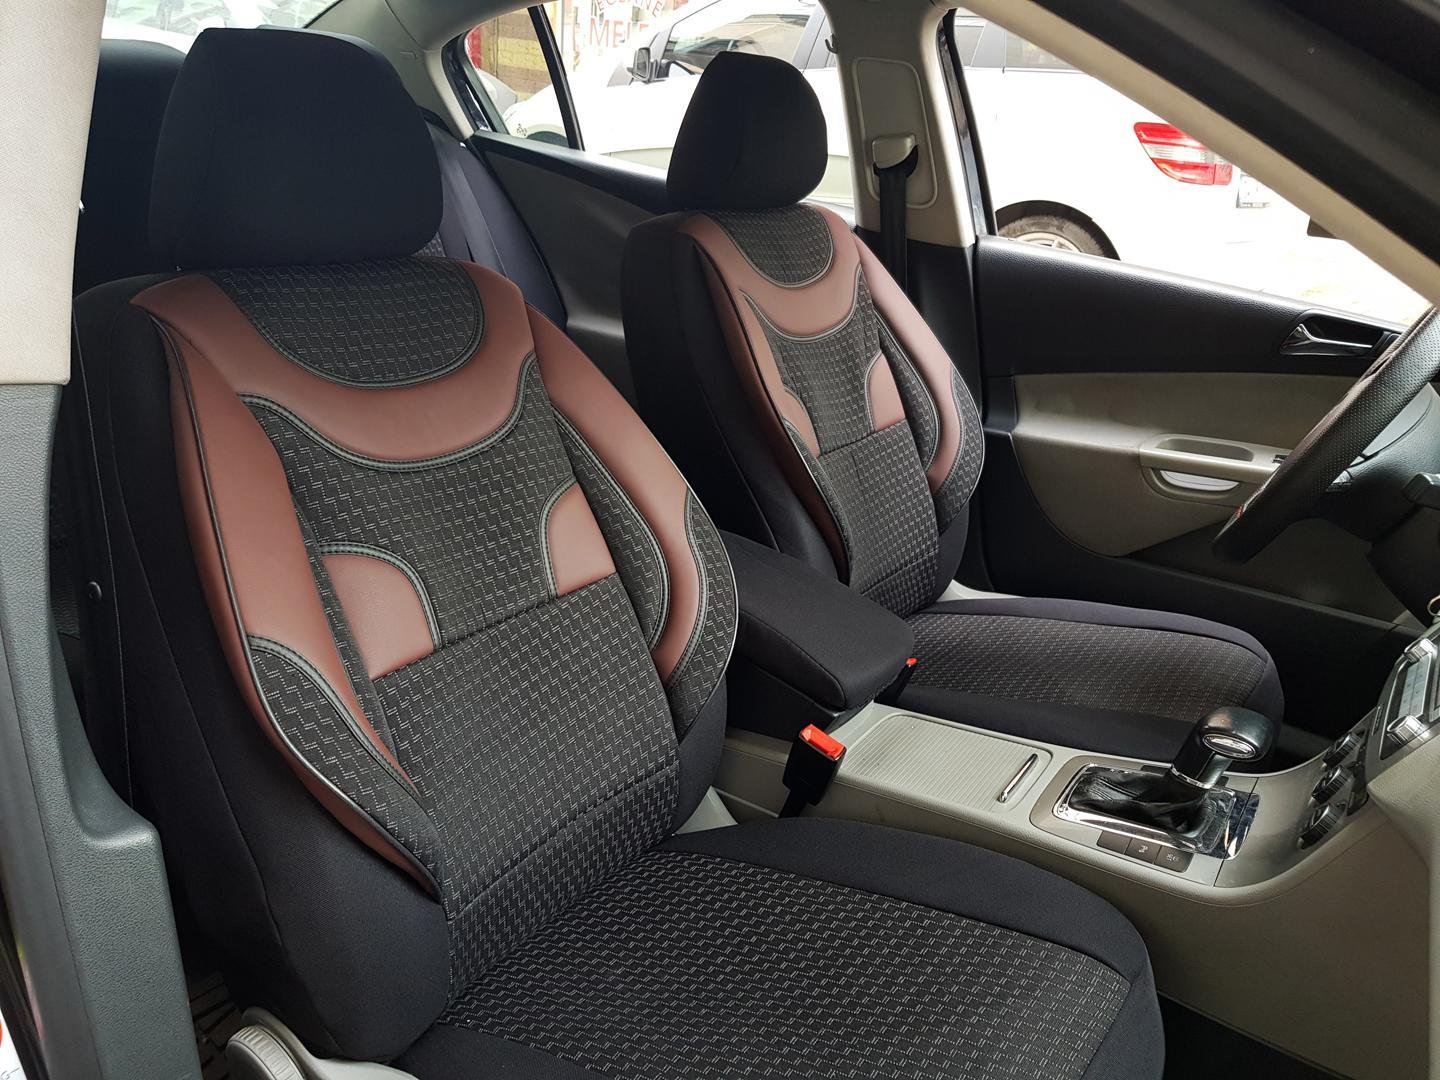 2 BLACK HIGH QUALITY FRONT CAR SEAT COVERS PROTECTORS FOR NISSAN JUKE